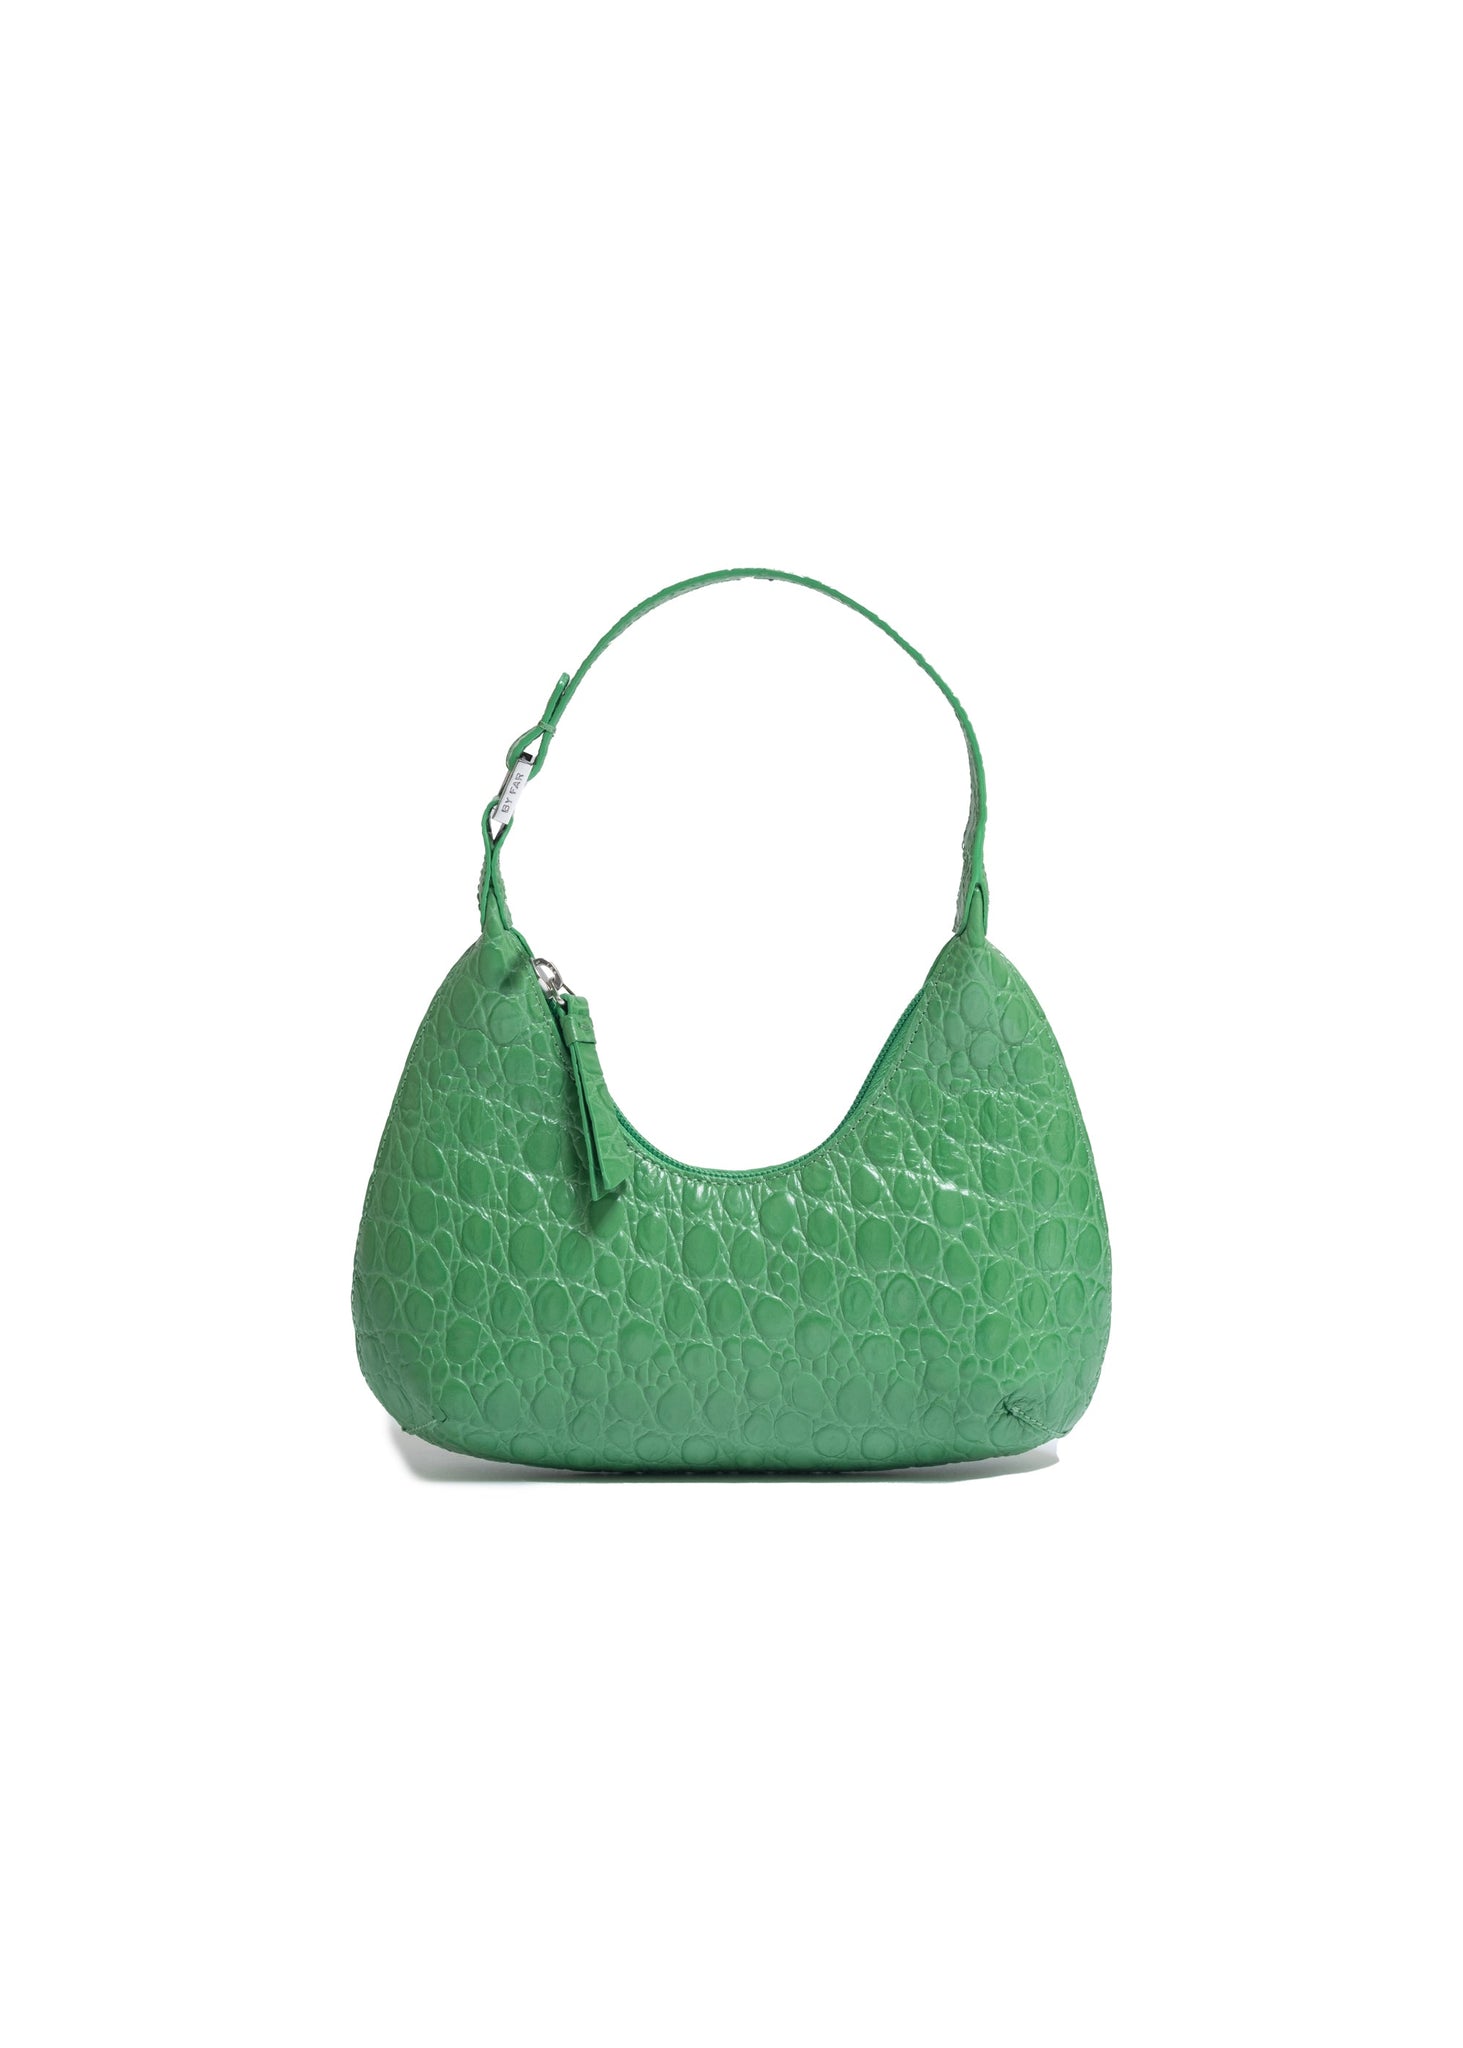 BY FAR: Green Baby Amber Bag - 157Moments